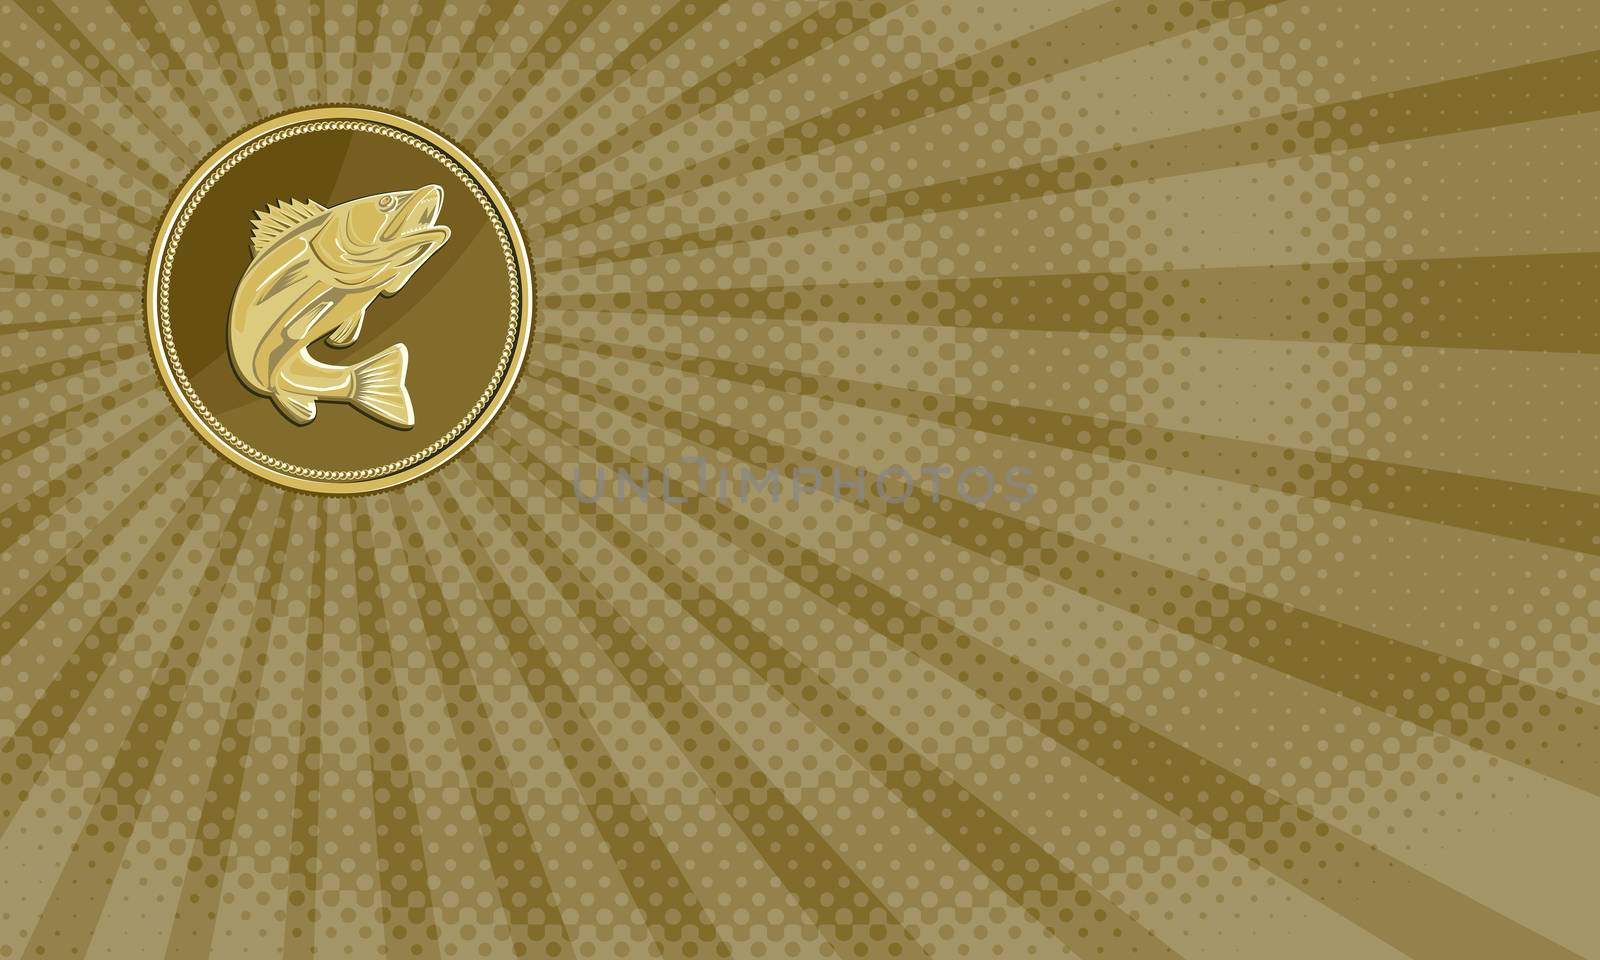 Business card showing Illustration of a barramundi or Asian sea bass (Lates calcarifer) jumping viewed from the side set inside gold brass coin medallion done in retro style. 


